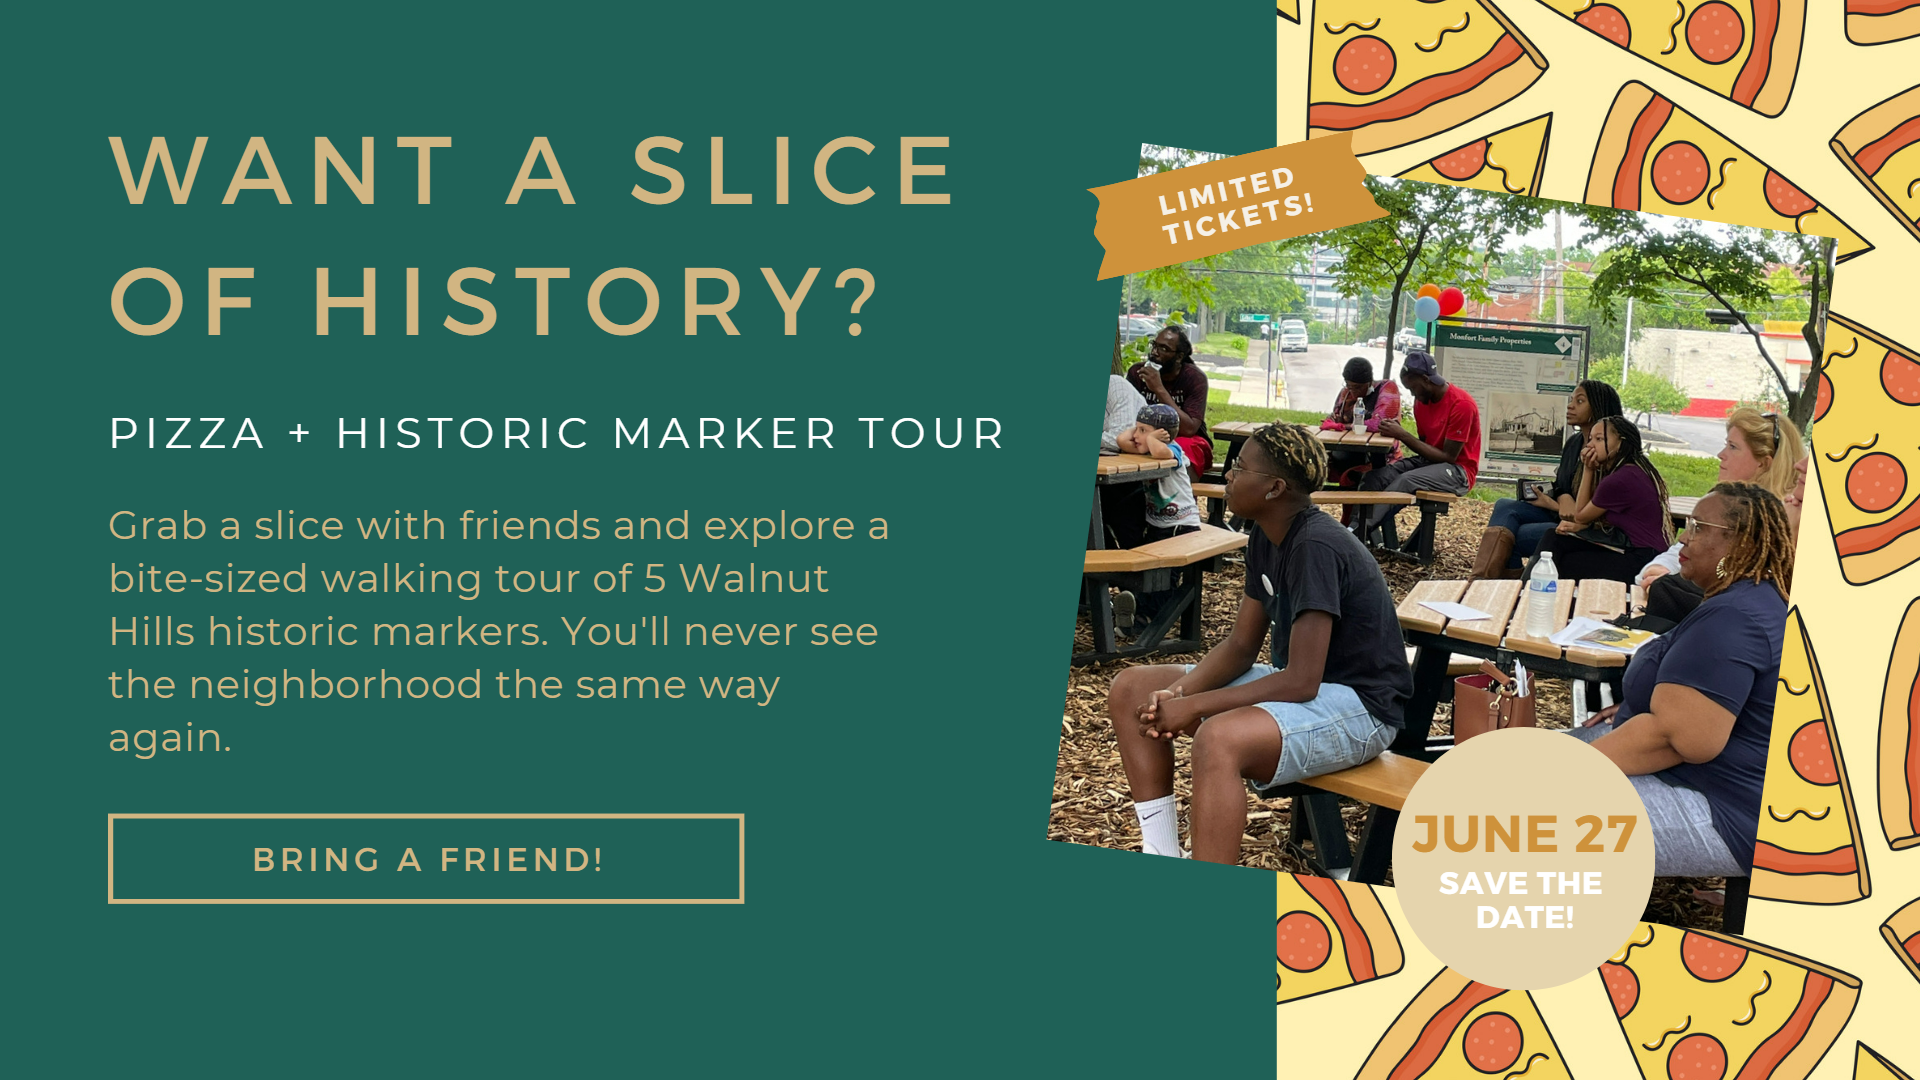 Slice of History: Pizza & Walking Tour